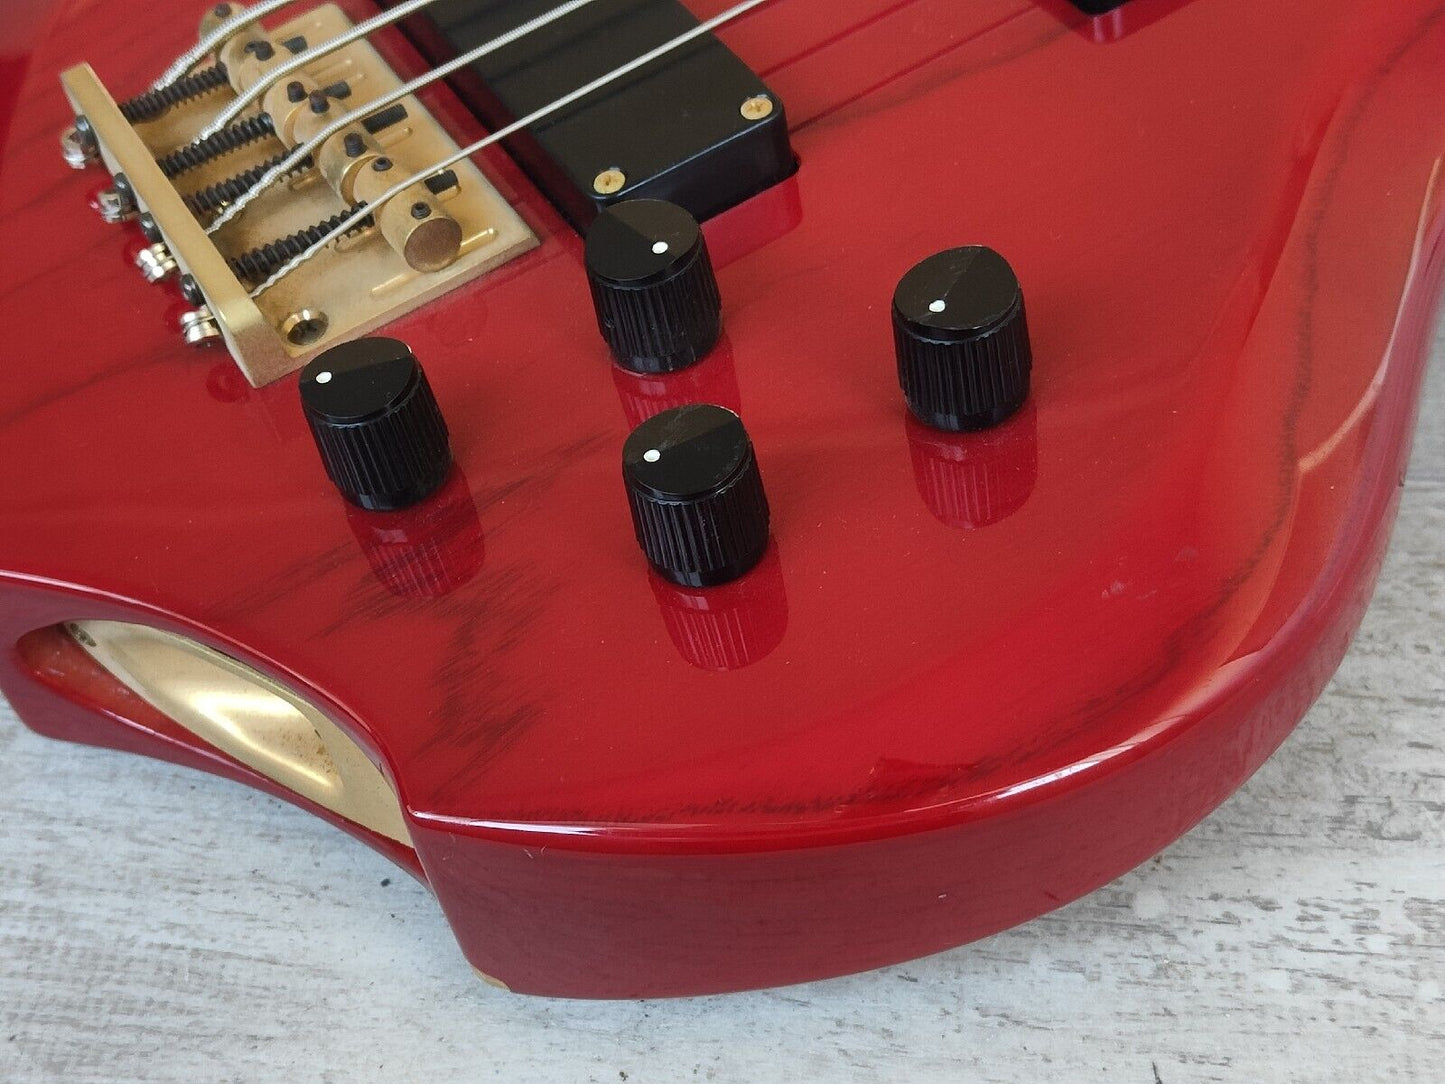 1998 Edwards (by ESP Japan) EFR-95 Forest Series Bass (Transparent Red)